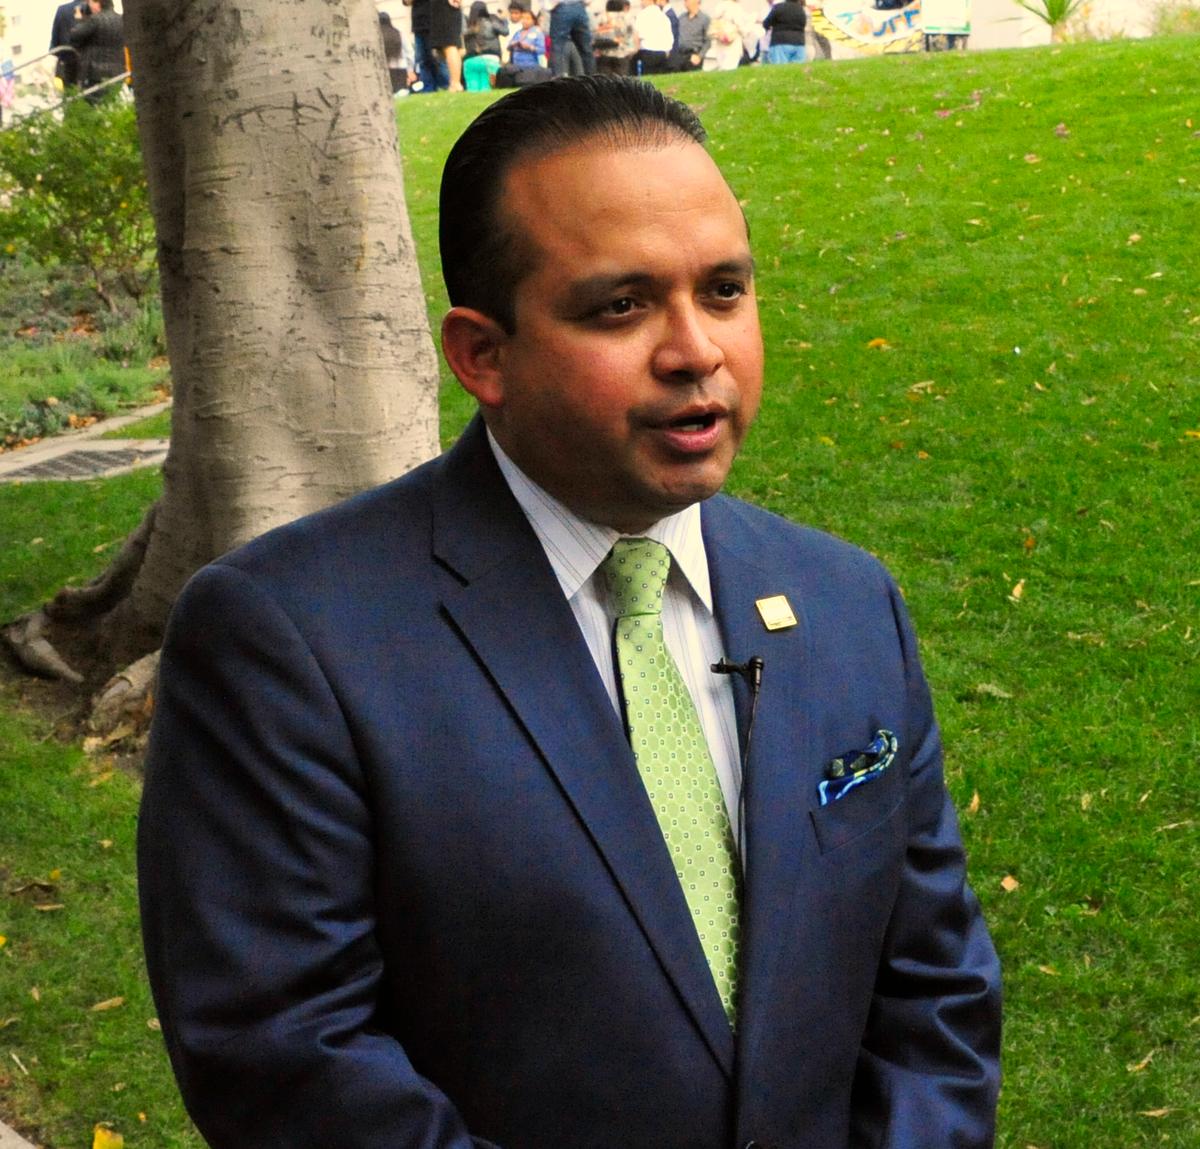 Sen. Luis Alejo (D-Salinas), author and sponsor of the Undocumented Immigrant Drivers License Bill, responding to media in Los Angeles on Oct. 3.